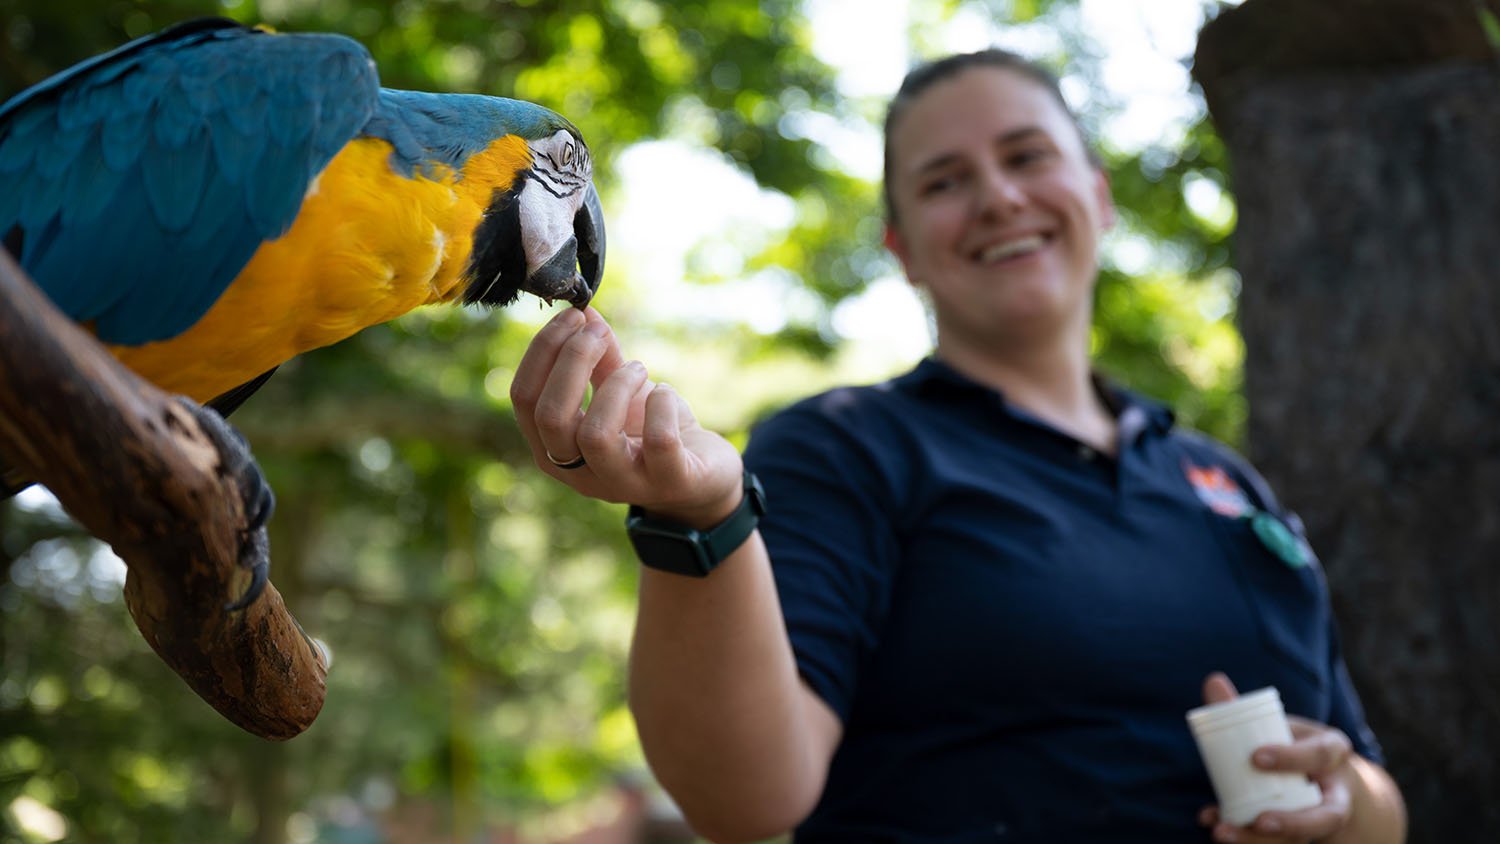 Zoo educator Chrissy Shore feeds Newton the macaw at the Beardsley Zoo in Bridgeport, Conn. Newton peels shells off of her nuts and seeds. Her favorite snack? Hard boiled eggs. (Ryan Caron King / Connecticut Public)